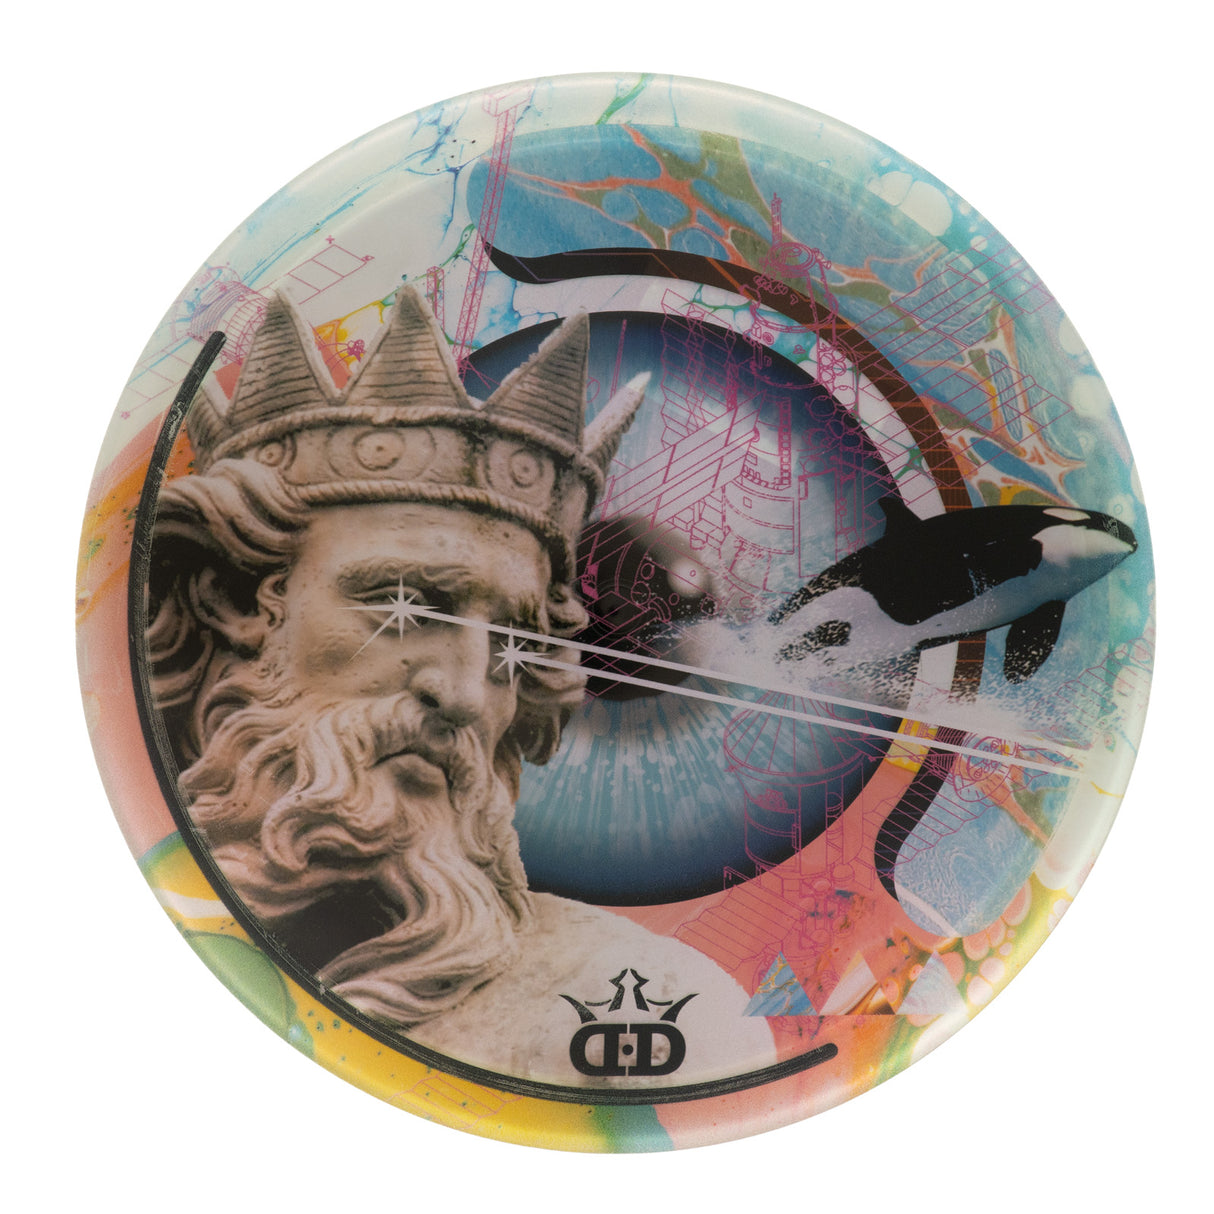 Dynamic Discs EMAC Truth - Glimmer Ice Dreamscape Dyemax 179g | Style 0001